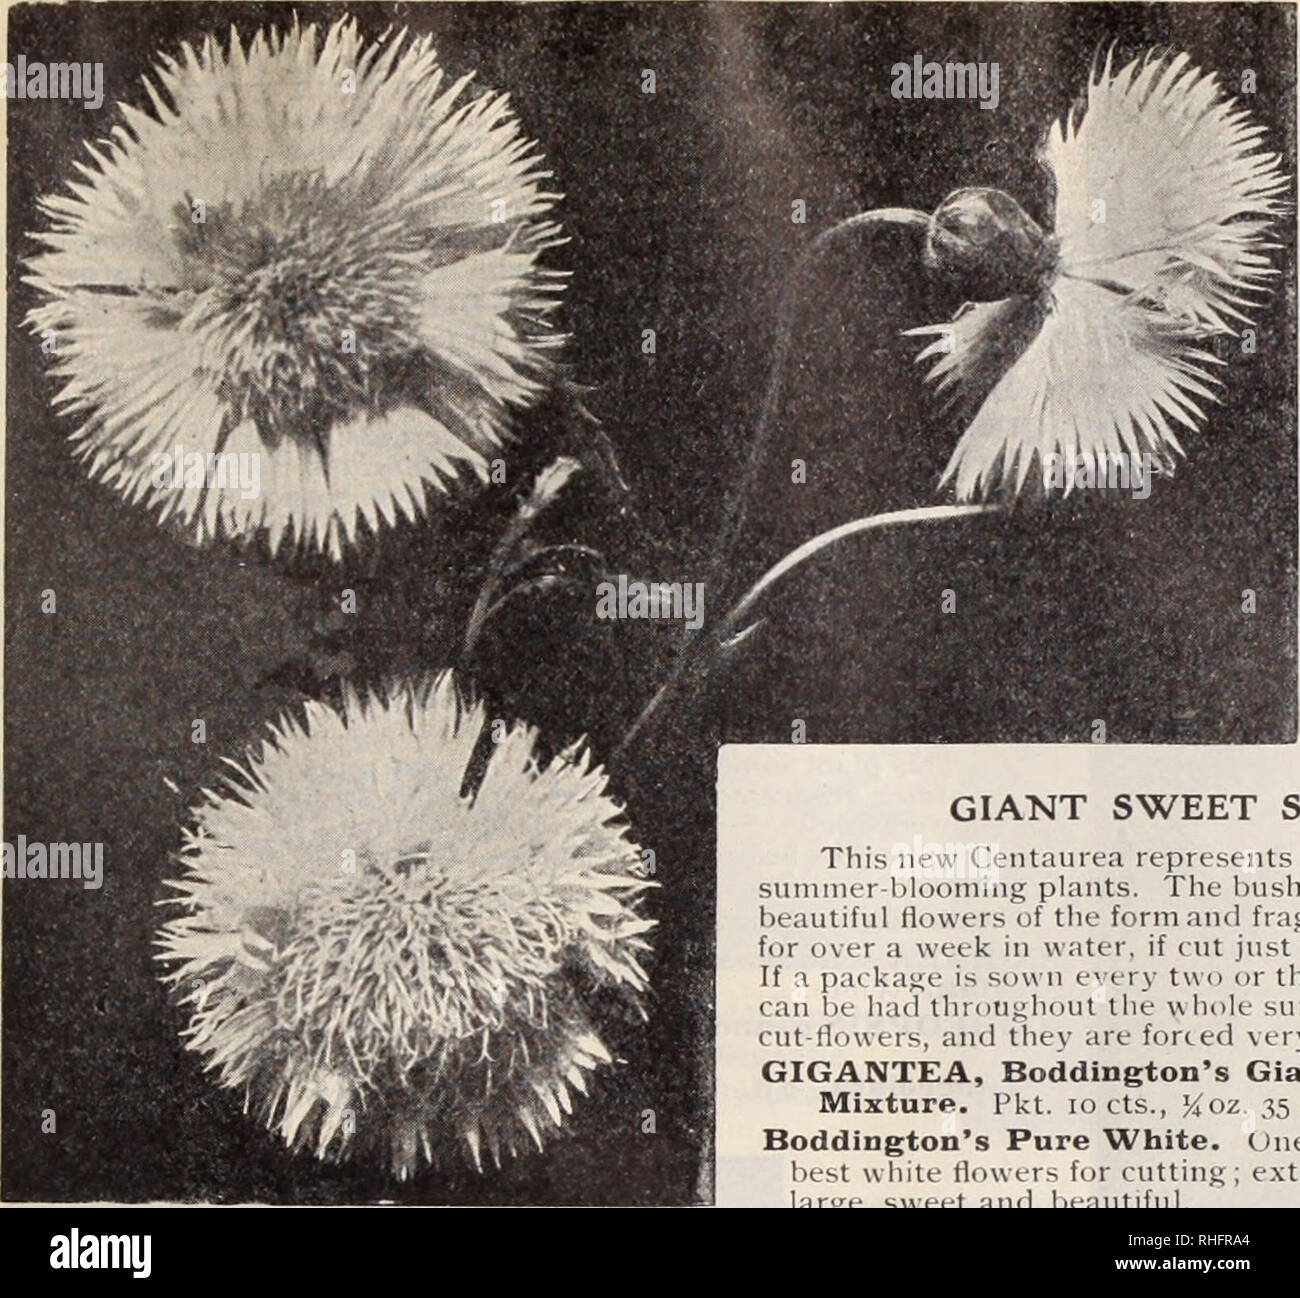 . Boddington's quality bulbs, seeds and plants / Arthur T. Boddington.. Nursery Catalogue. BODDINGTON'S SEEDS. Centaurea (H h.p. and h.a.) Candidissimai I)usly iMillei ). i ft. For Pkt. Oz. borders or ed&gt;;iiius-• i ,000 seeds, 75c. .$0 20 Gymnocarpa. Taller than the above... 10 go 80 Odorata Chameleon. Yellow and rose ;  i-i v fra.nraiit 10 2 00 Margaritae. i 5; ft. Fluwers 2'i inches ;u Tci^s, of the (lurest white and delight- fiill' scented. A garden treasnre 10 I 00 Suaveolens (Yellow Sweet Sultan) 05 60 Montana, Blue. H.P. 2ft. Summer.. 05 alba. H.P. 2ft. White.... 10 CYANUS (Blue Cor Stock Photo